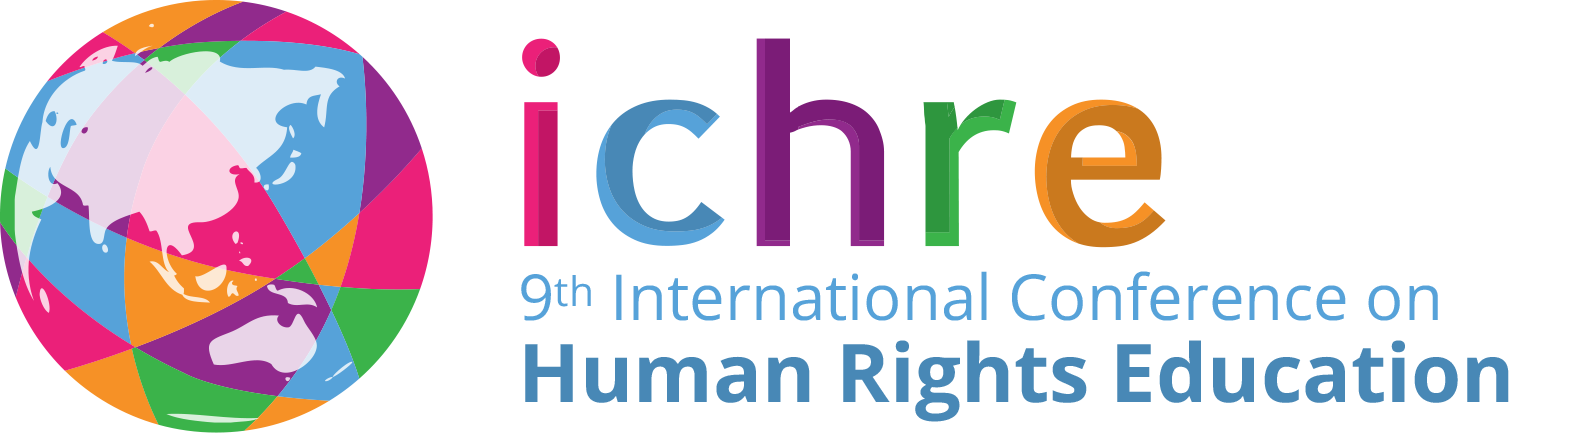 ICHRE, 9th International Conference on Human Rights Education, logo